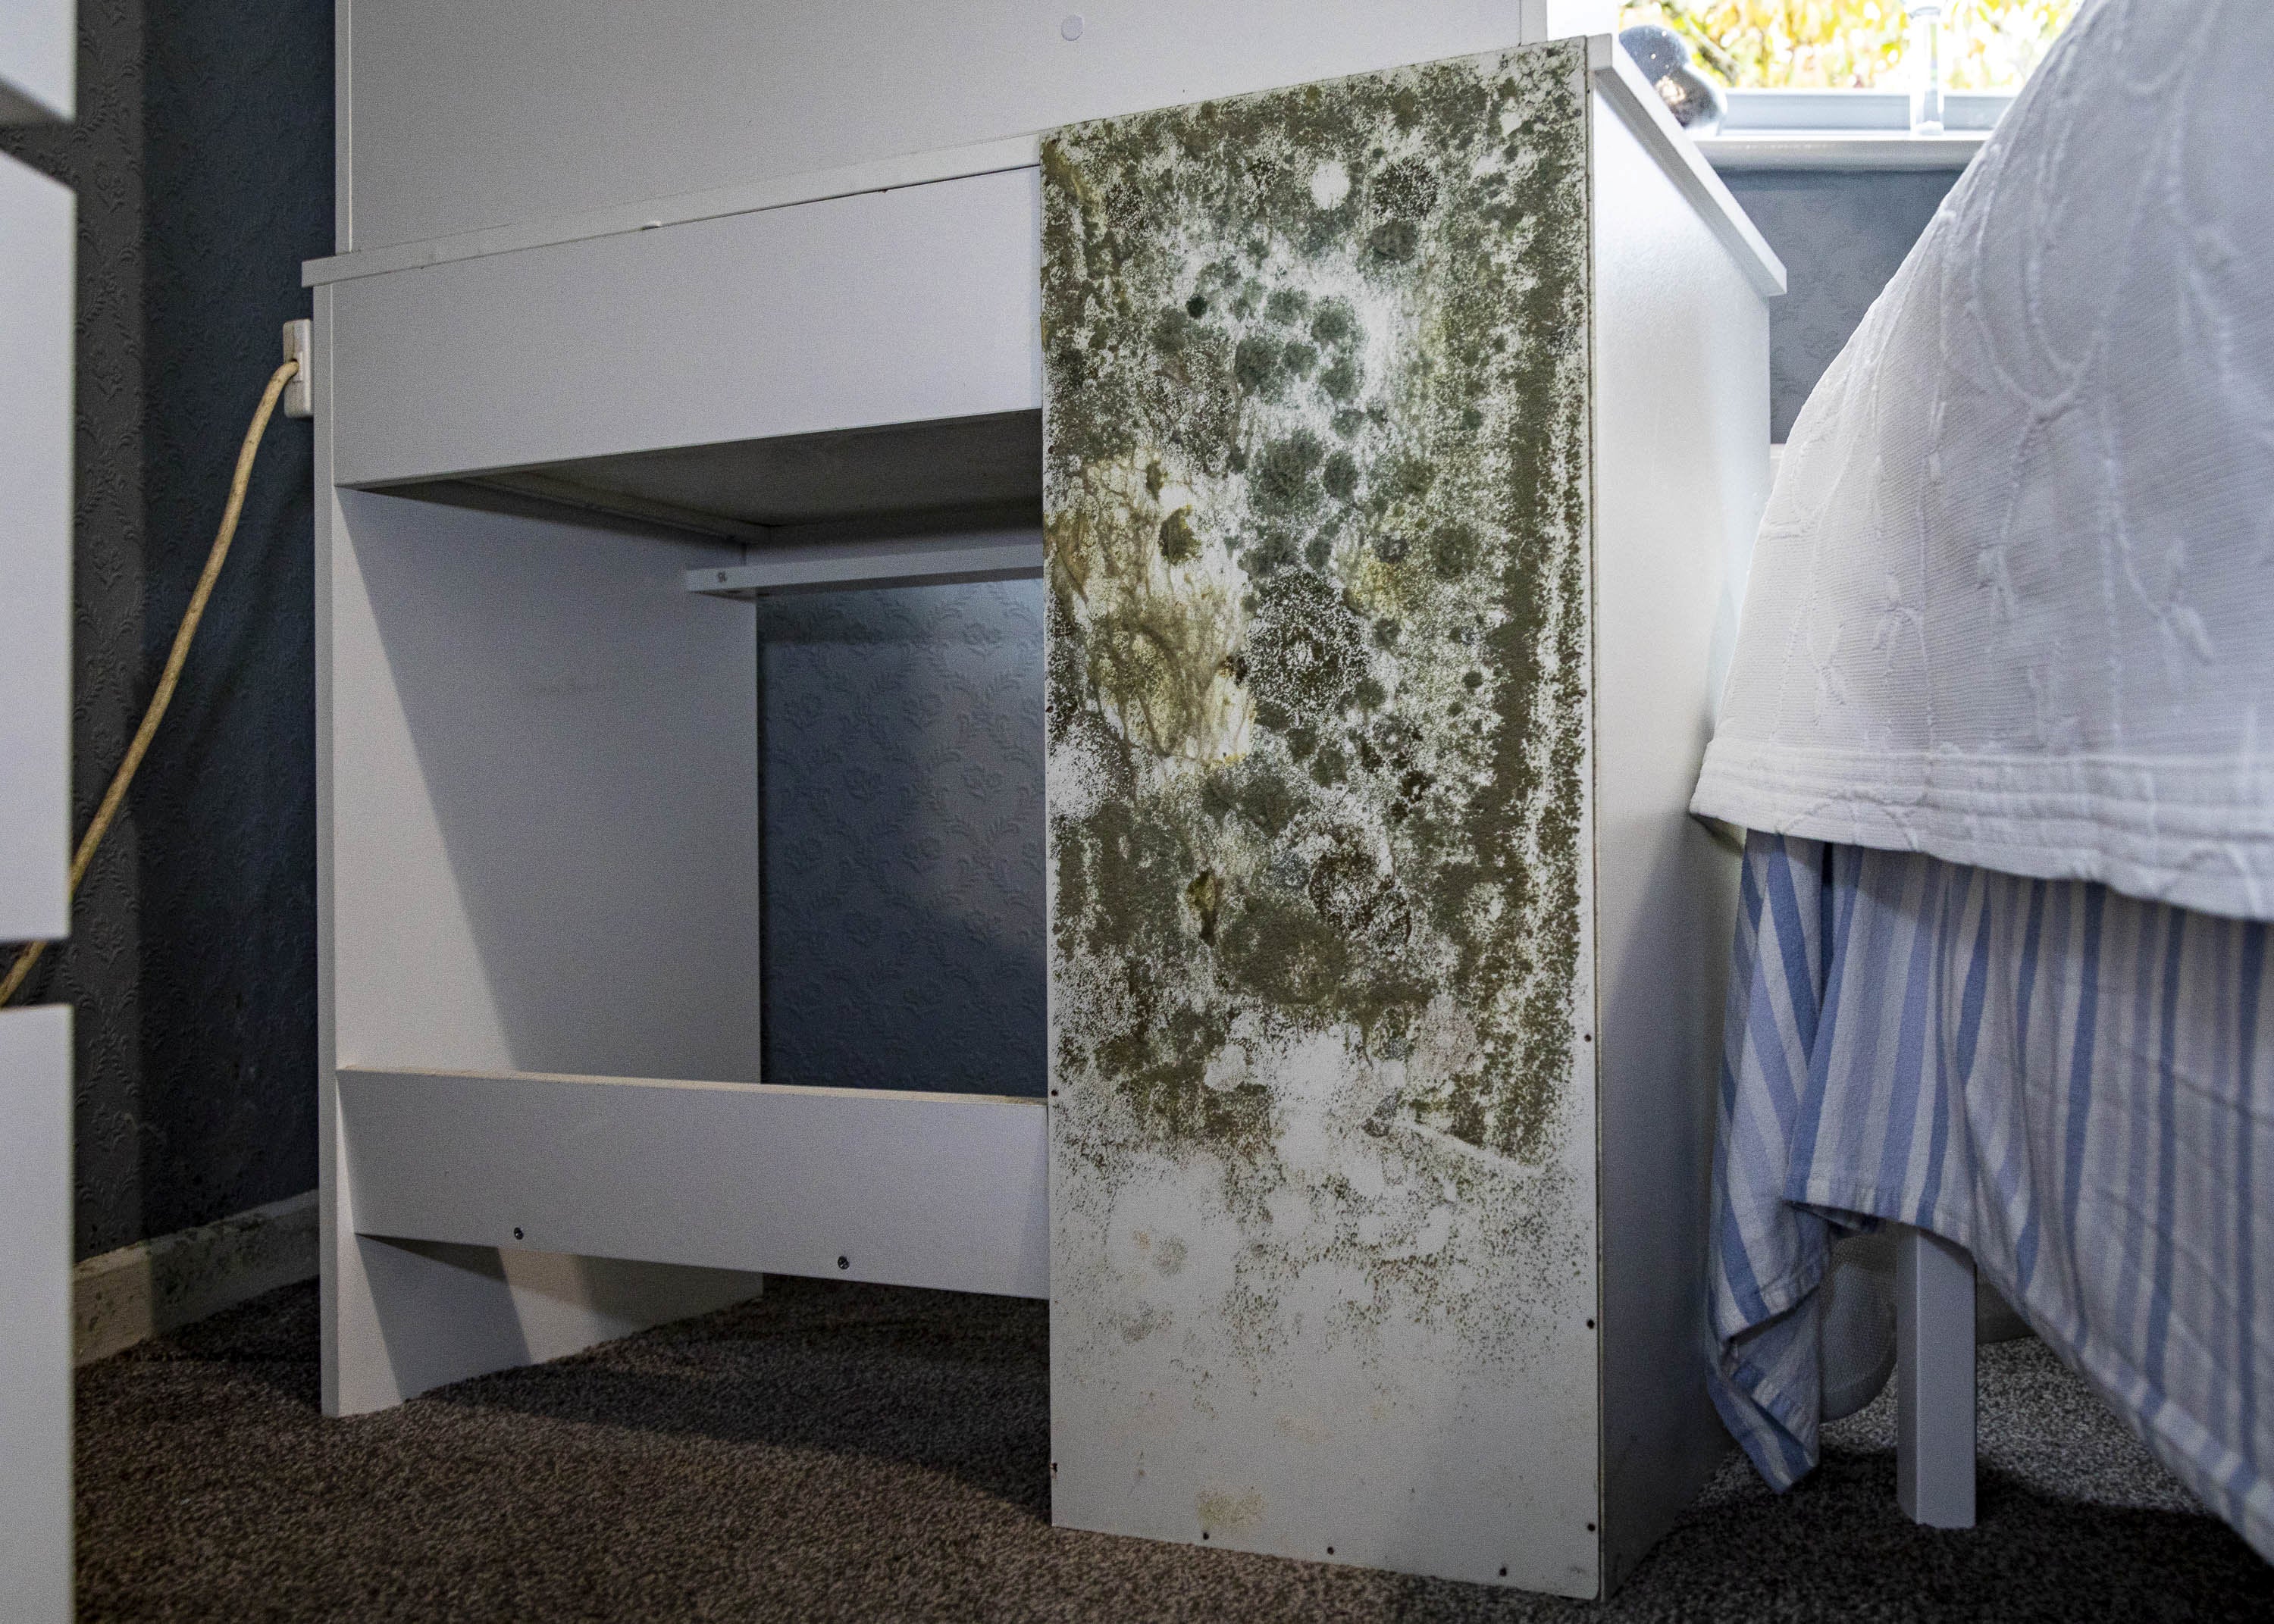 Tenants say they have tried everything from anti–mould spray, dehumidifiers and portable heaters to tackle mold and damp